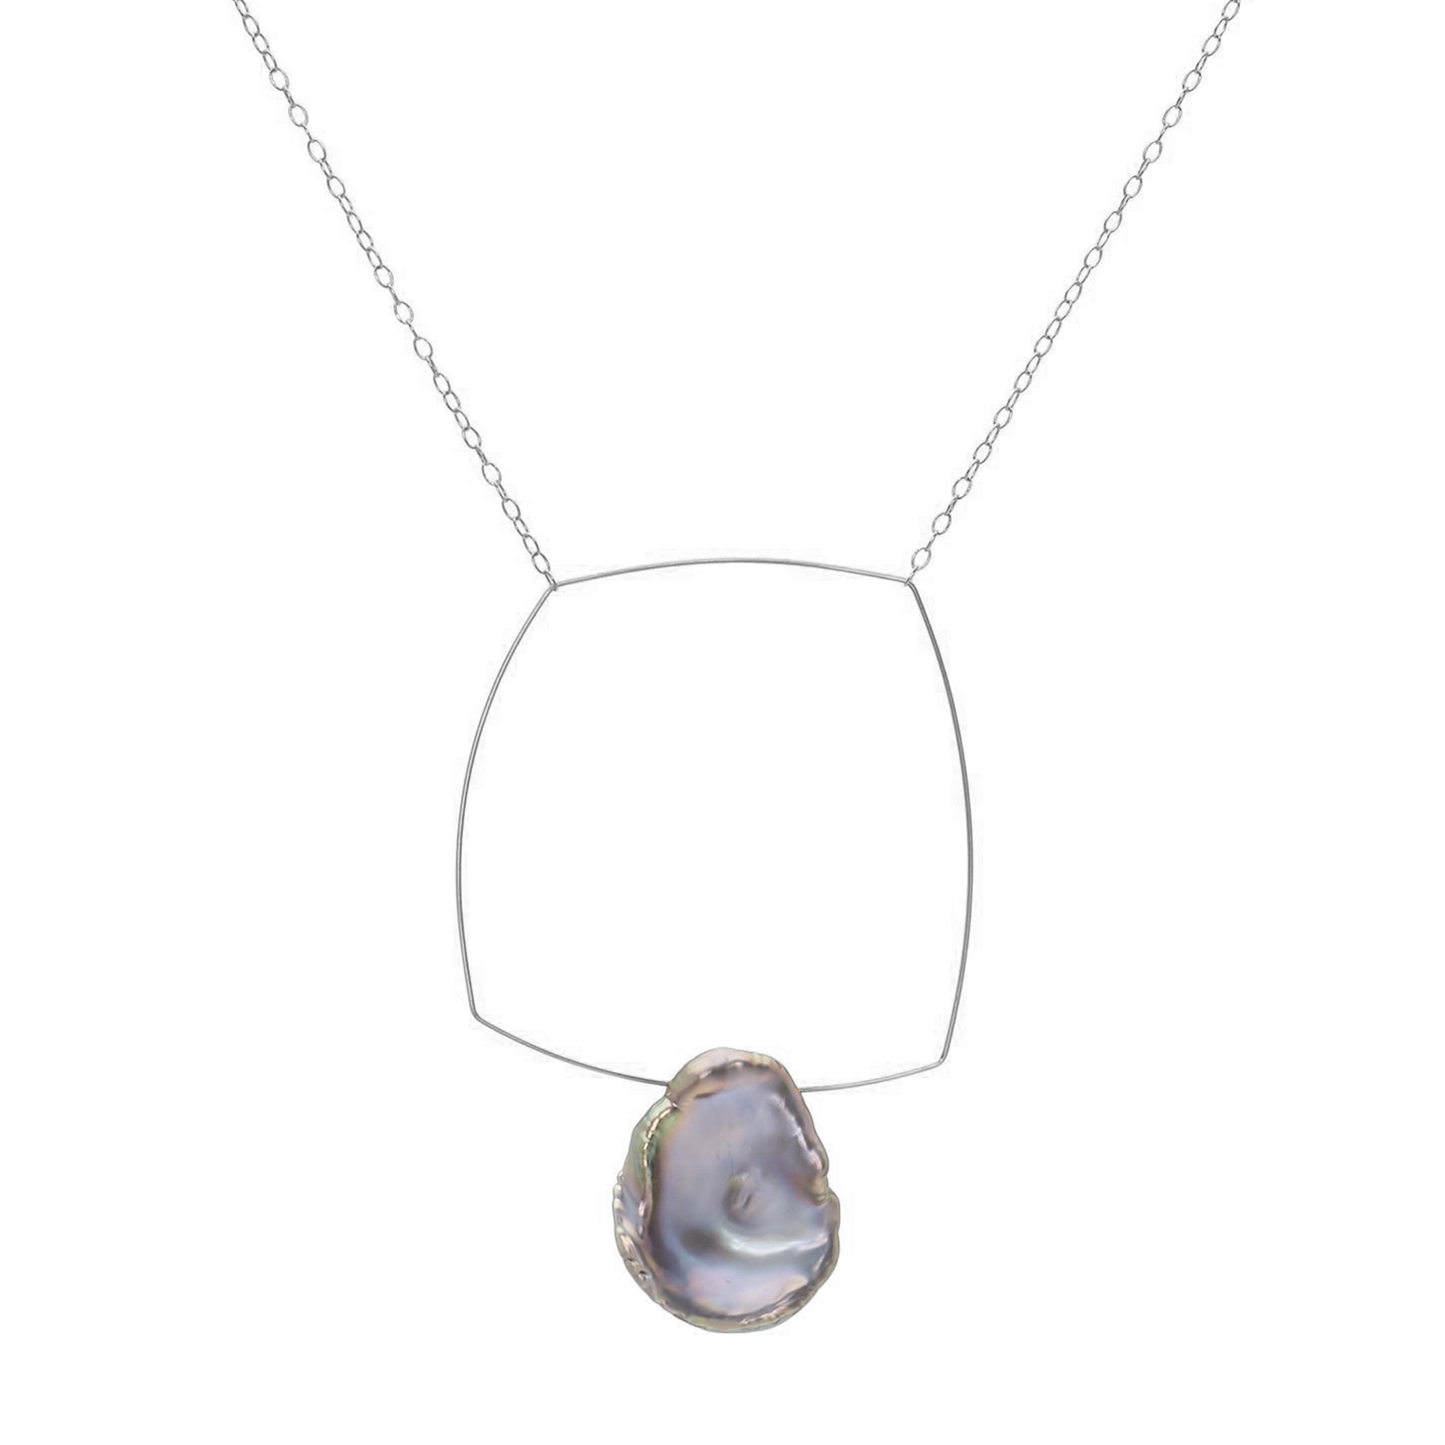 Square Pendant Necklace with Keshi Fresh Water Pearl